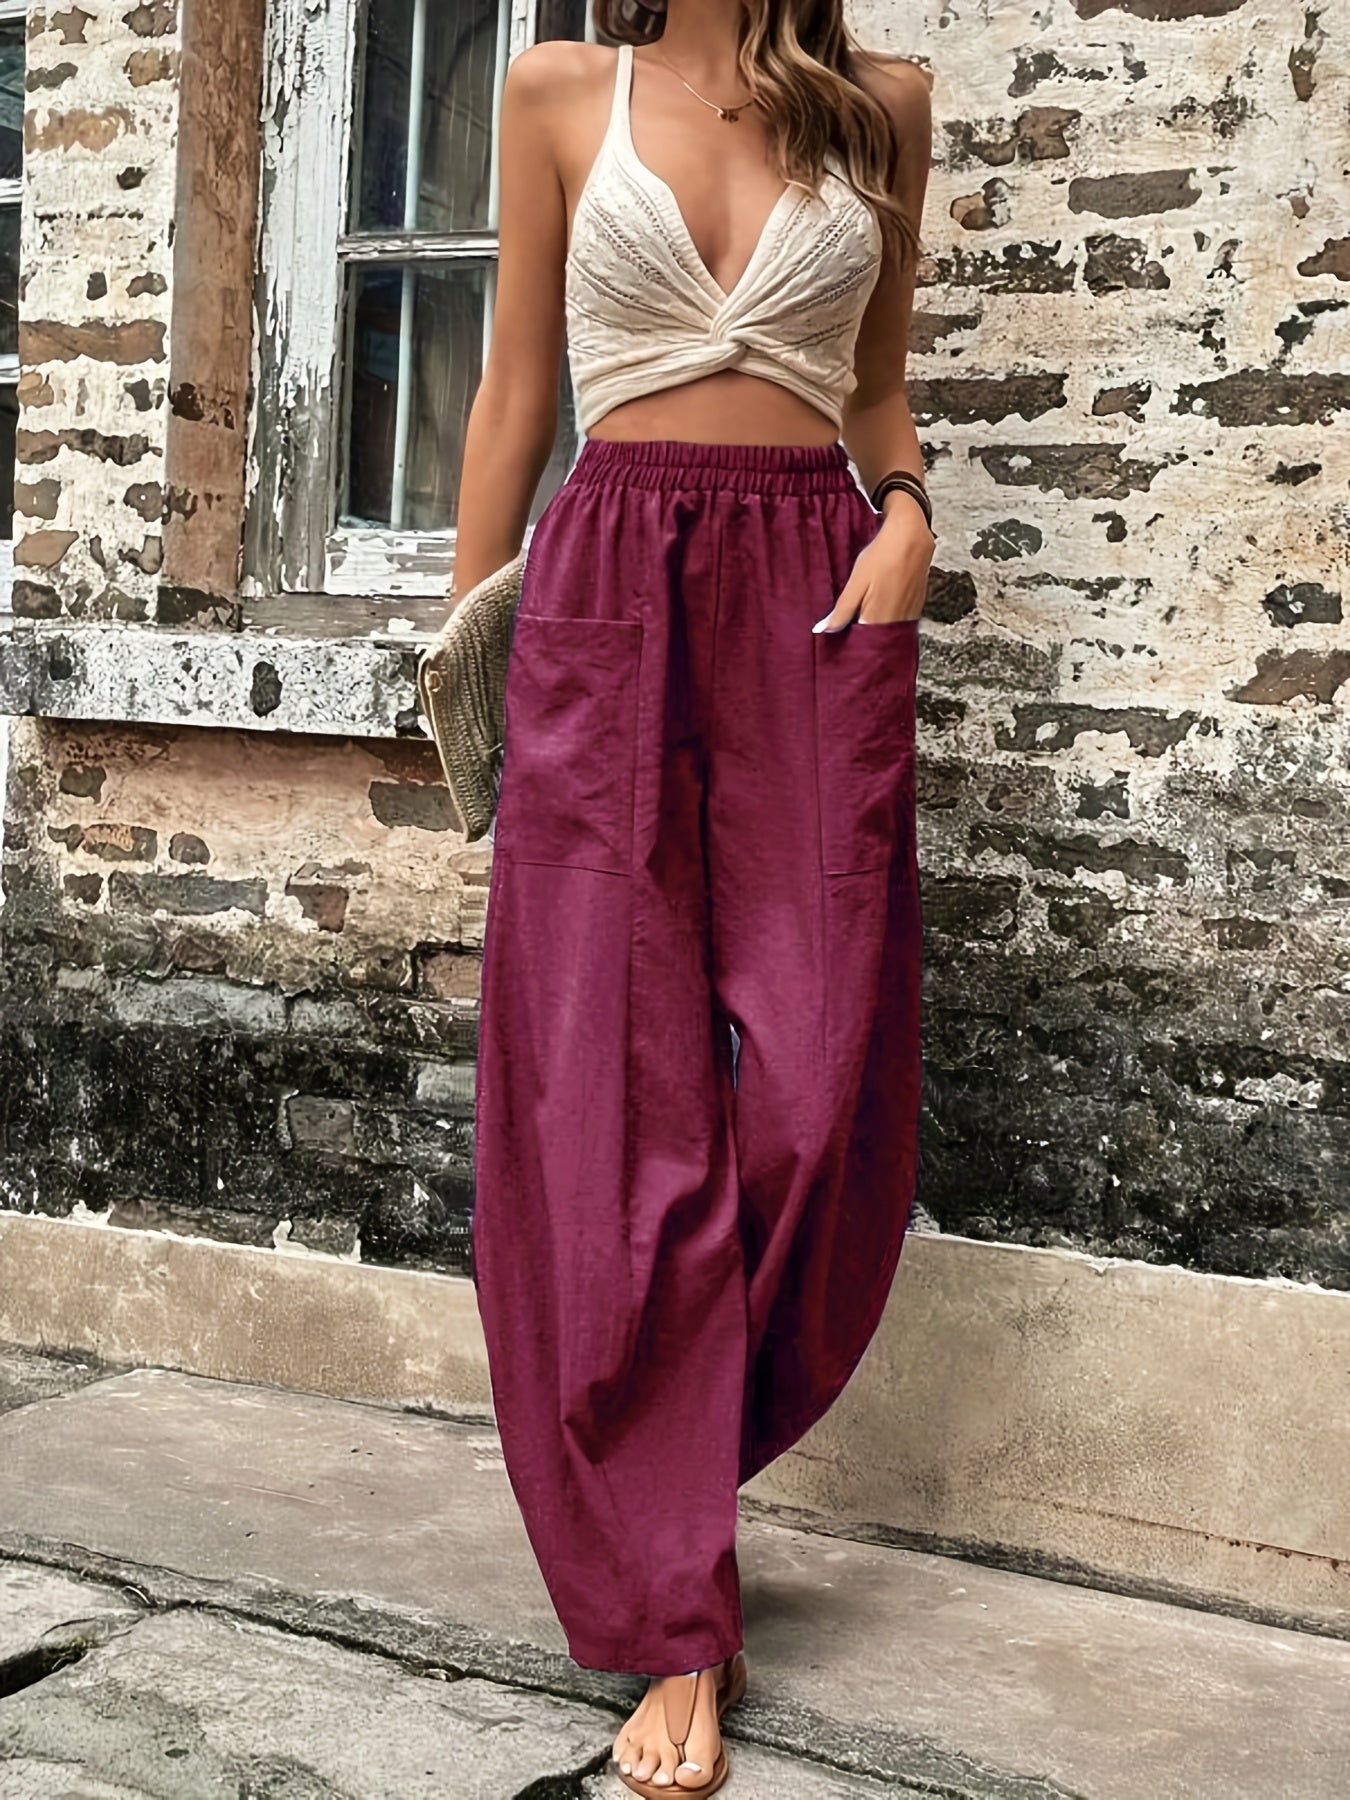 Vzyzv Boho Solid Elastic Waist Harem Pants, Casual Long Length Baggy Pants With Pockets For Spring & Summer, Women's Clothing